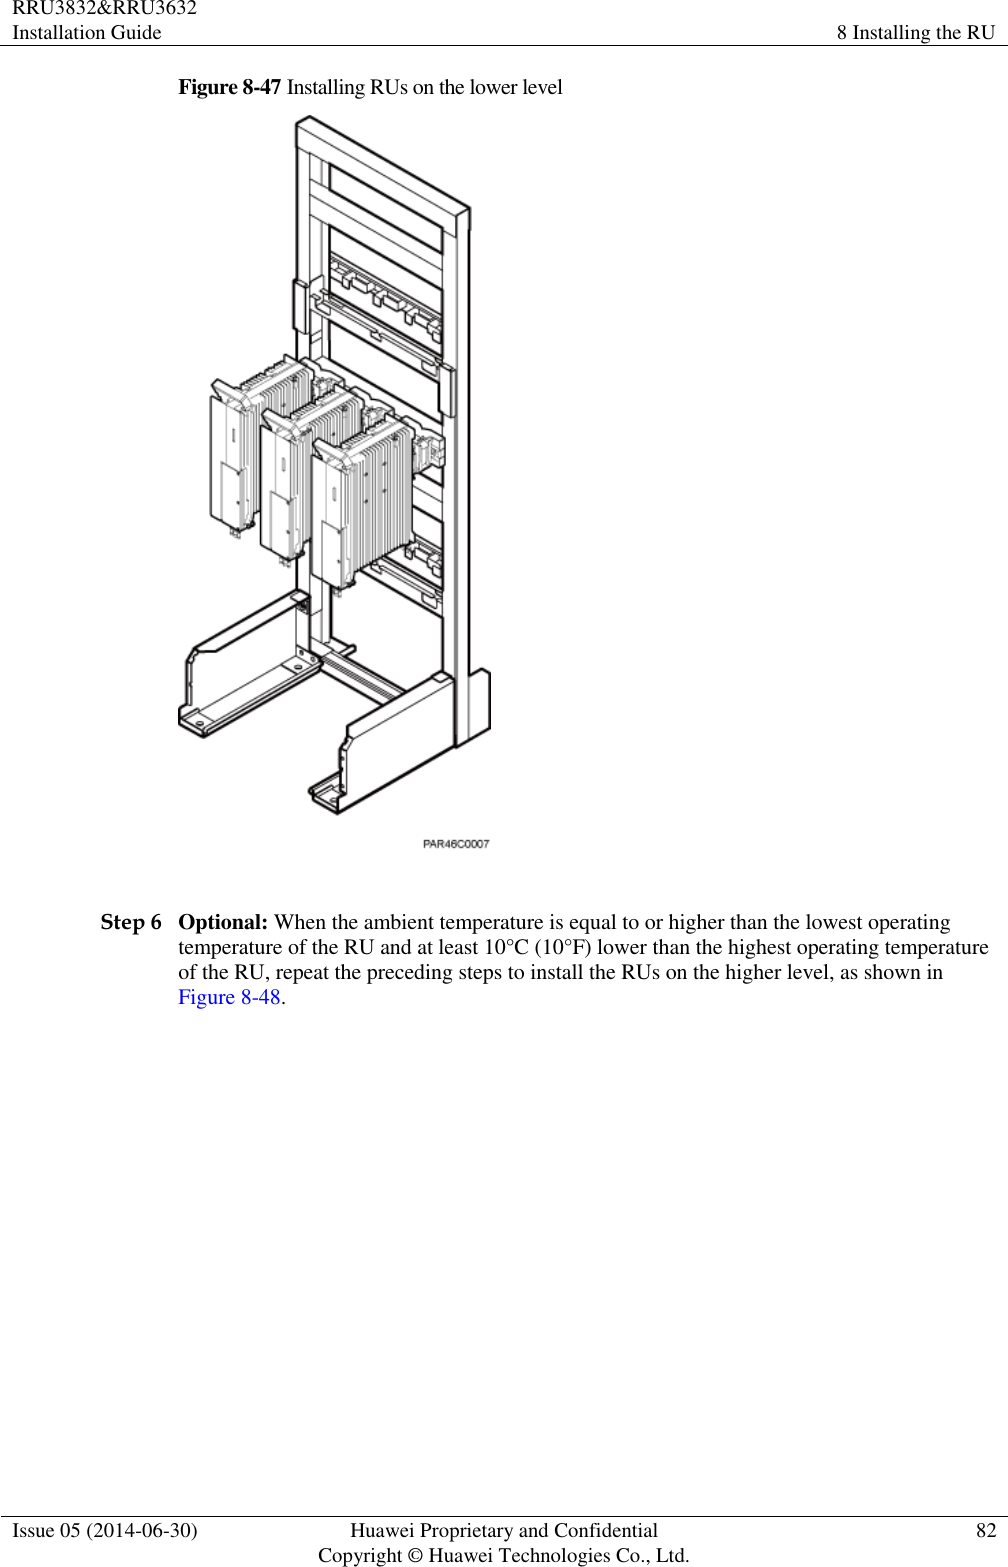 RRU3832&amp;RRU3632 Installation Guide 8 Installing the RU  Issue 05 (2014-06-30) Huawei Proprietary and Confidential                                     Copyright © Huawei Technologies Co., Ltd. 82  Figure 8-47 Installing RUs on the lower level   Step 6 Optional: When the ambient temperature is equal to or higher than the lowest operating temperature of the RU and at least 10°C (10°F) lower than the highest operating temperature of the RU, repeat the preceding steps to install the RUs on the higher level, as shown in Figure 8-48. 